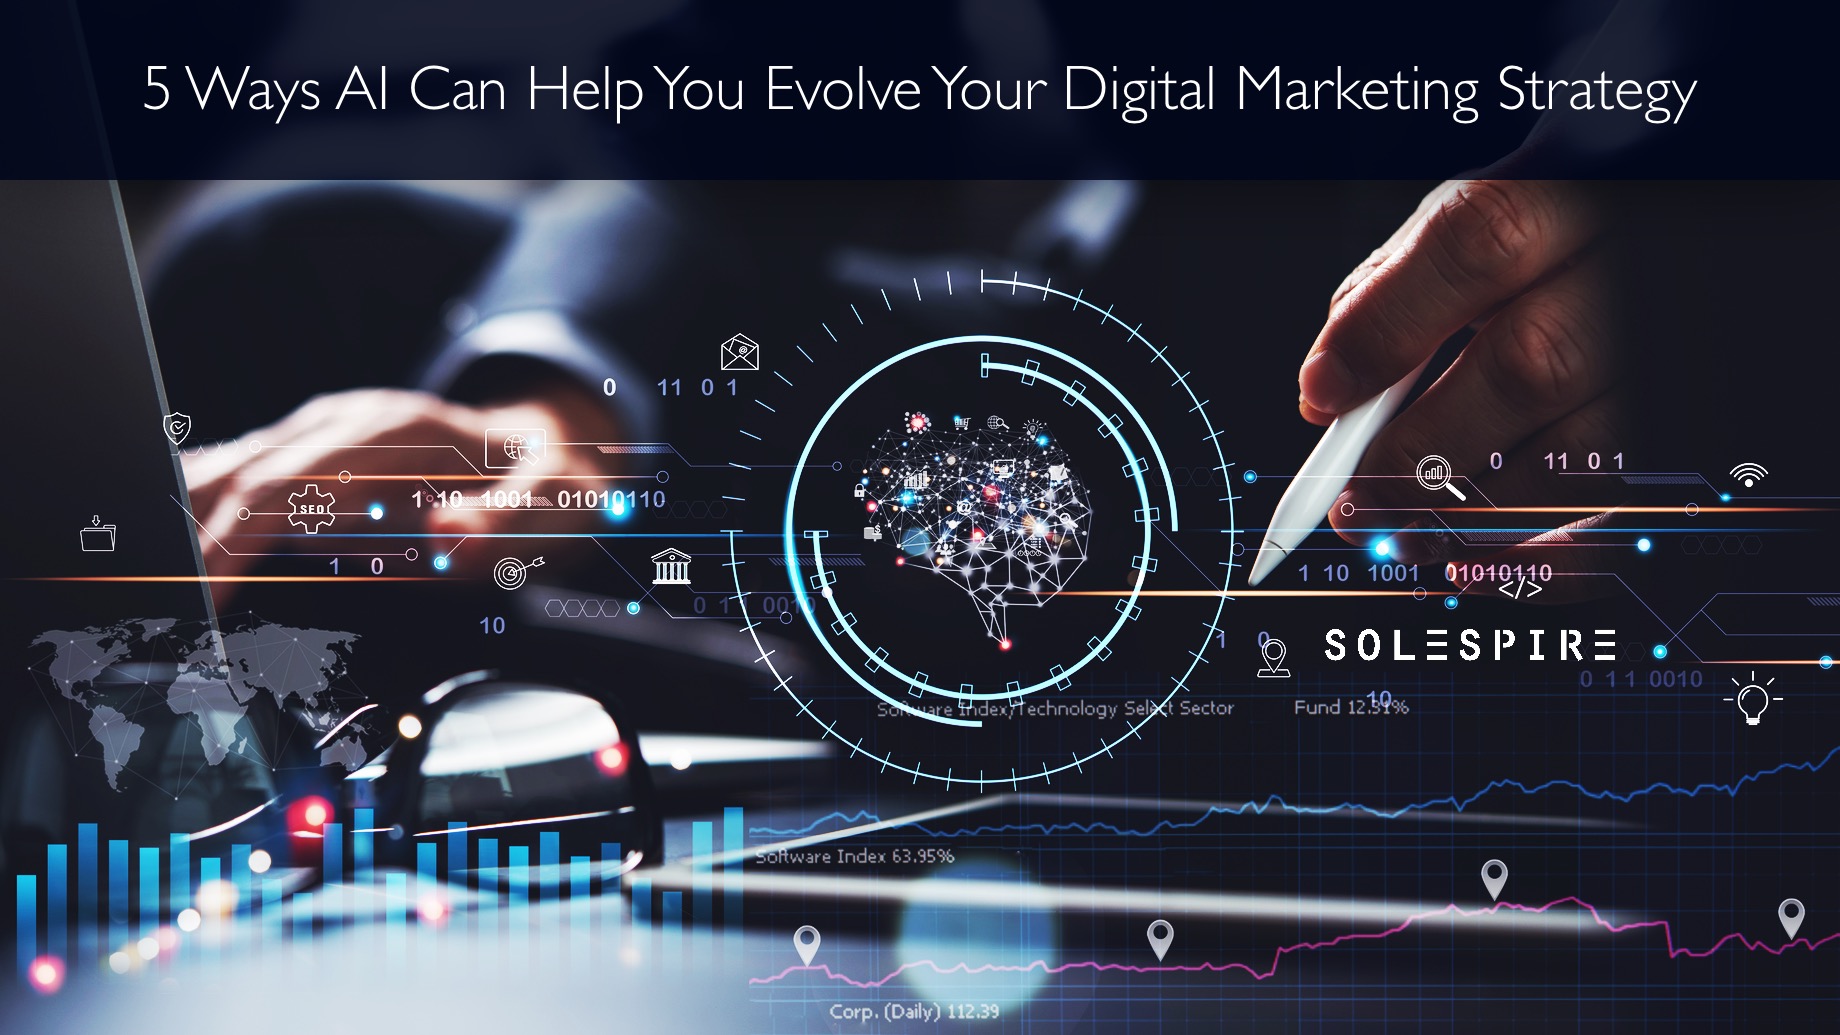 5 Ways AI Can Help You Evolve Your Digital Marketing Strategy